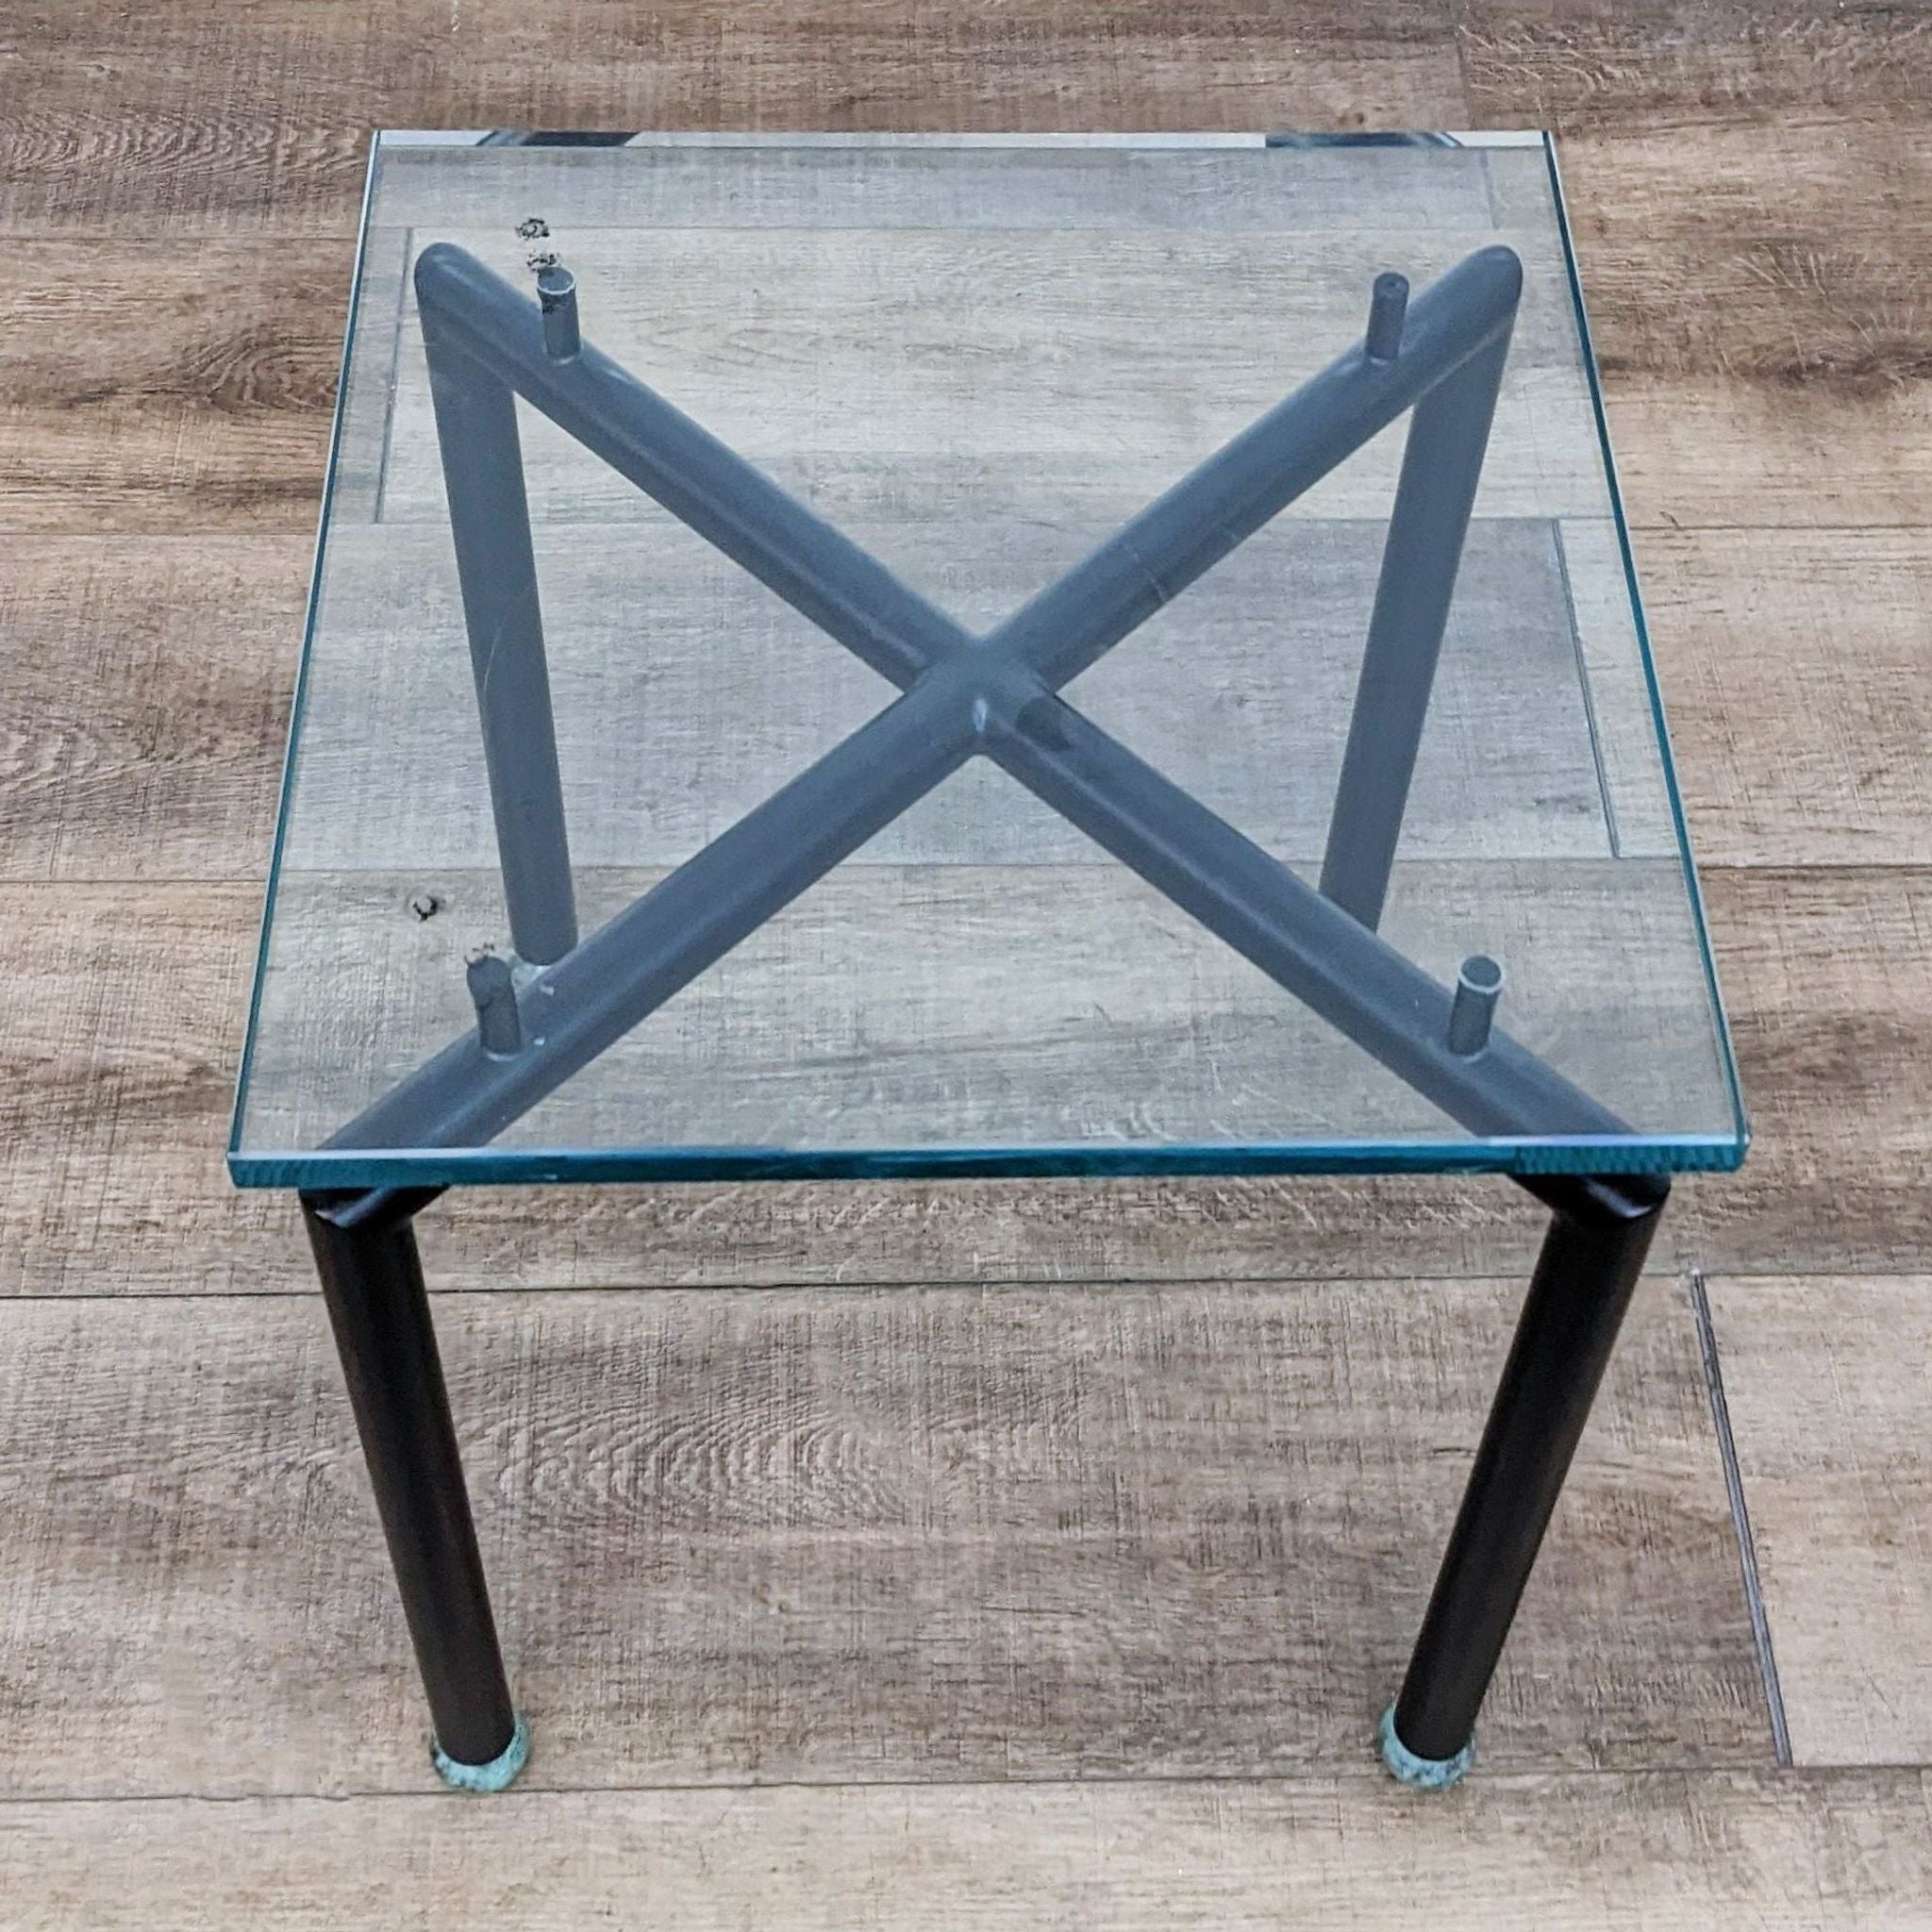 Glass top console table by Reperch with a metal X-shaped base structure and blue edges, on wooden flooring.